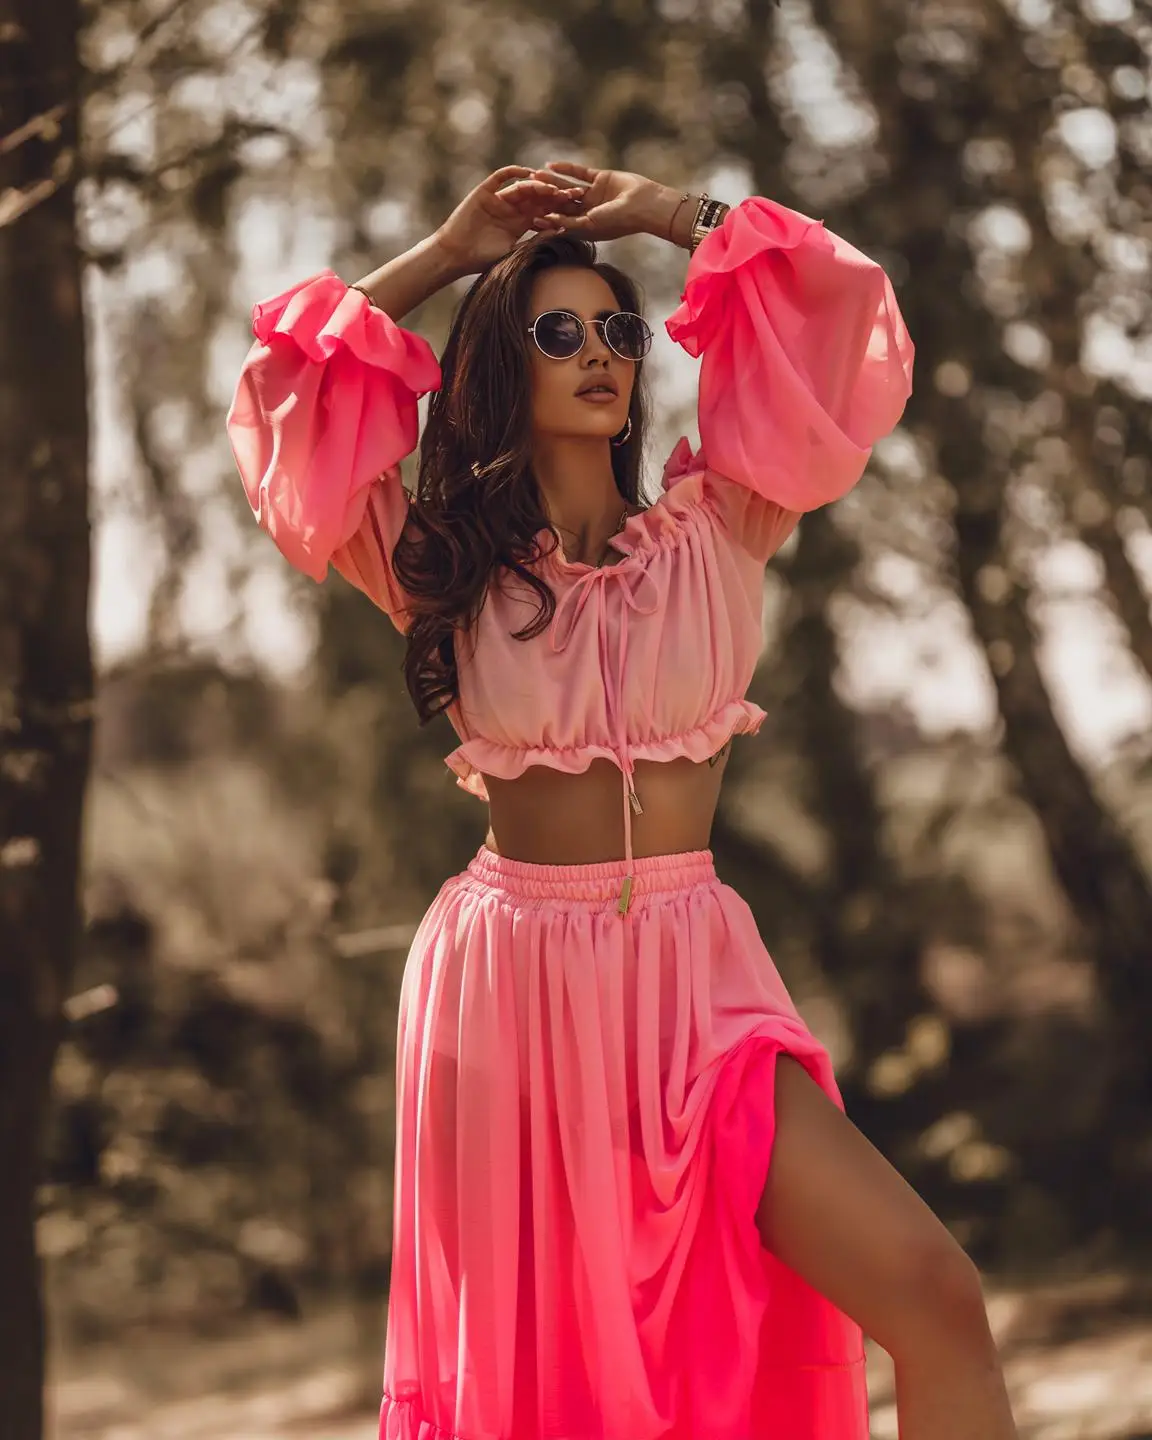 Summer Fashion Womens Two-Piece Outfits Gradient Color Long Sleeve Tie-Up Crop Tops + High Waist Long Skirt Beachwear Hot Sale bathing suit cover Cover-Ups